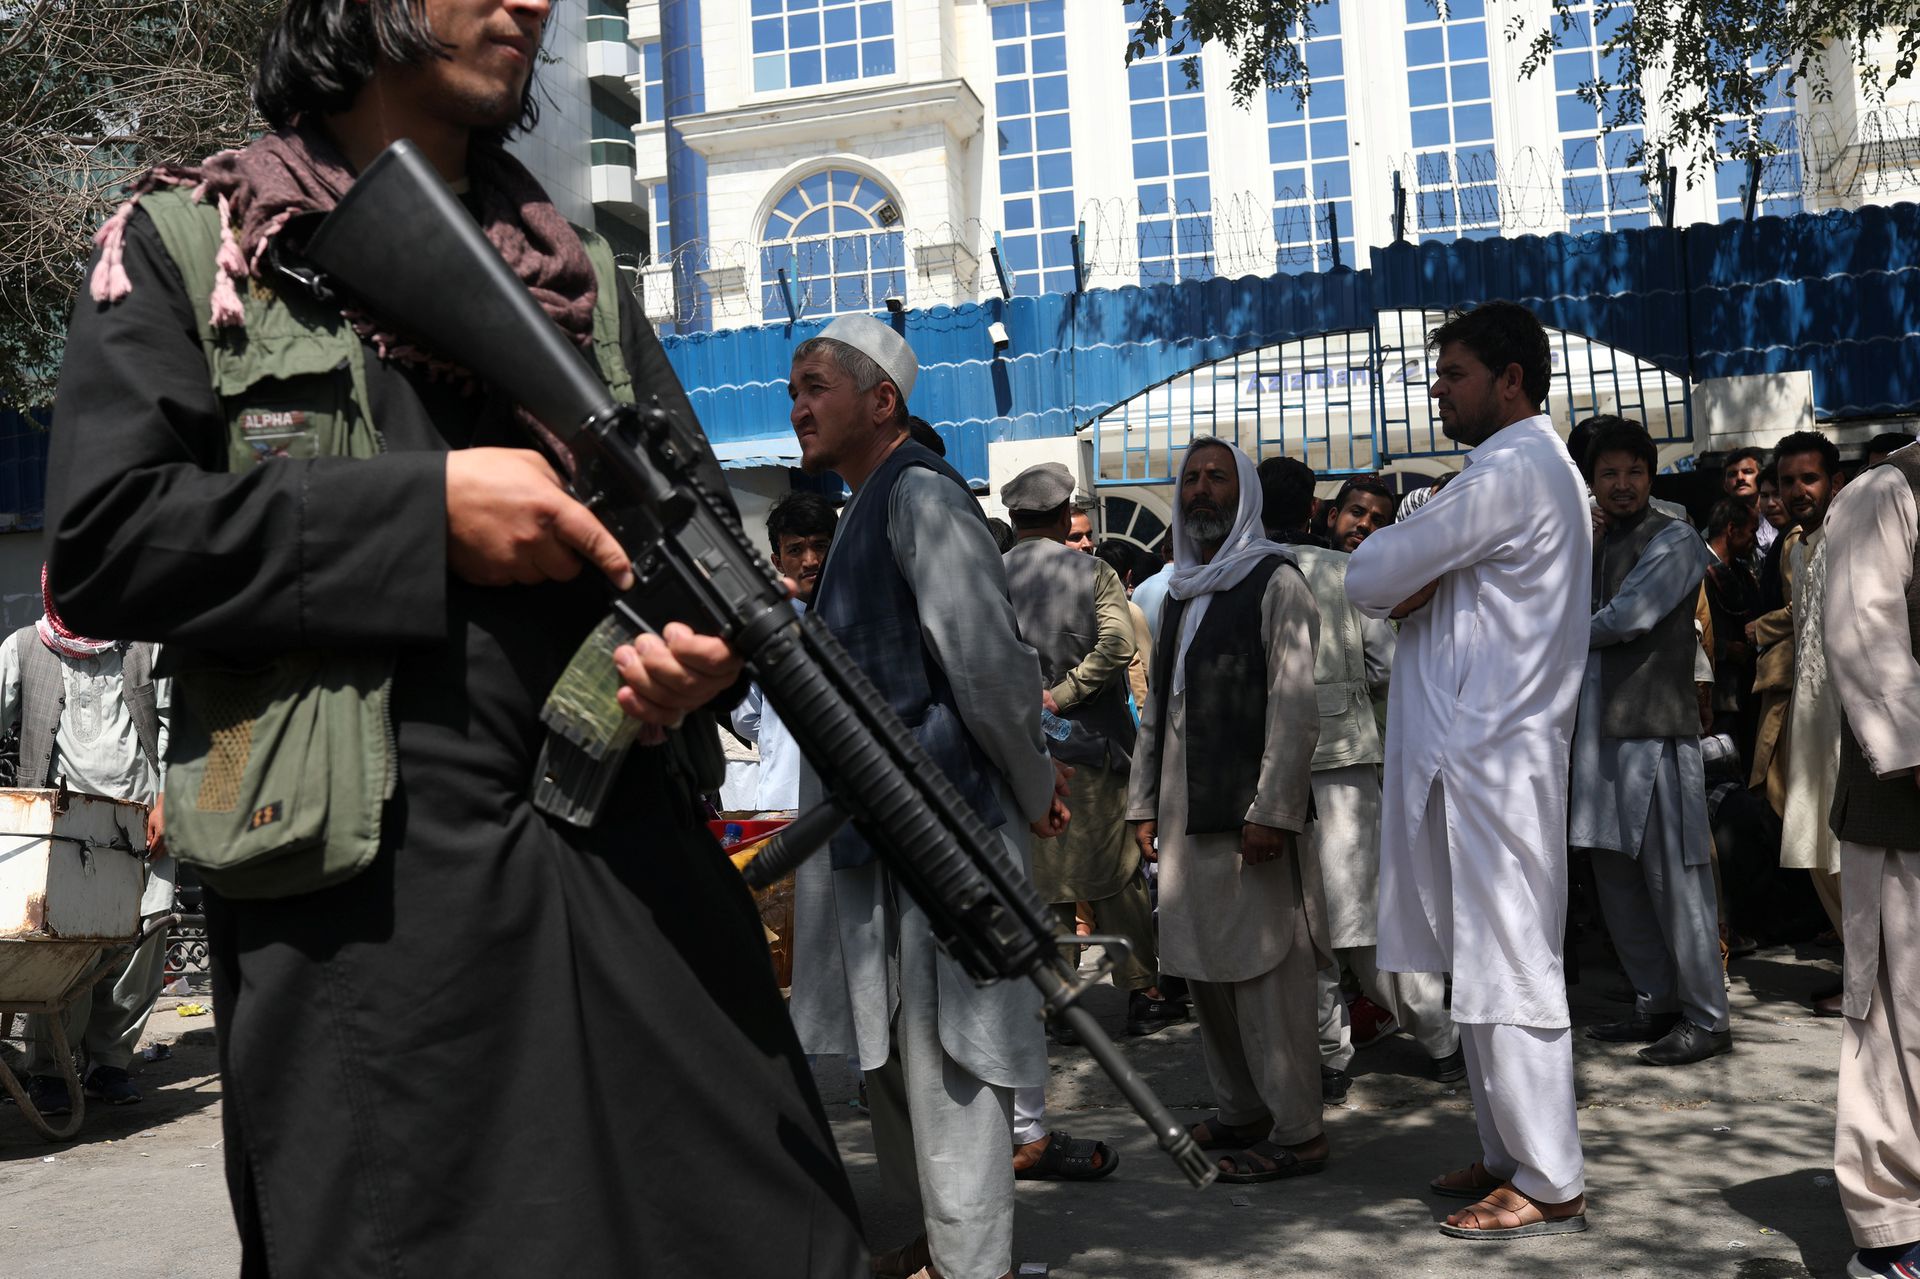 A Taliban security member holding a rifle ensures order in front of Azizi Bank in Kabul, Afghanistan, September 4. Photo: West Asia News Agency